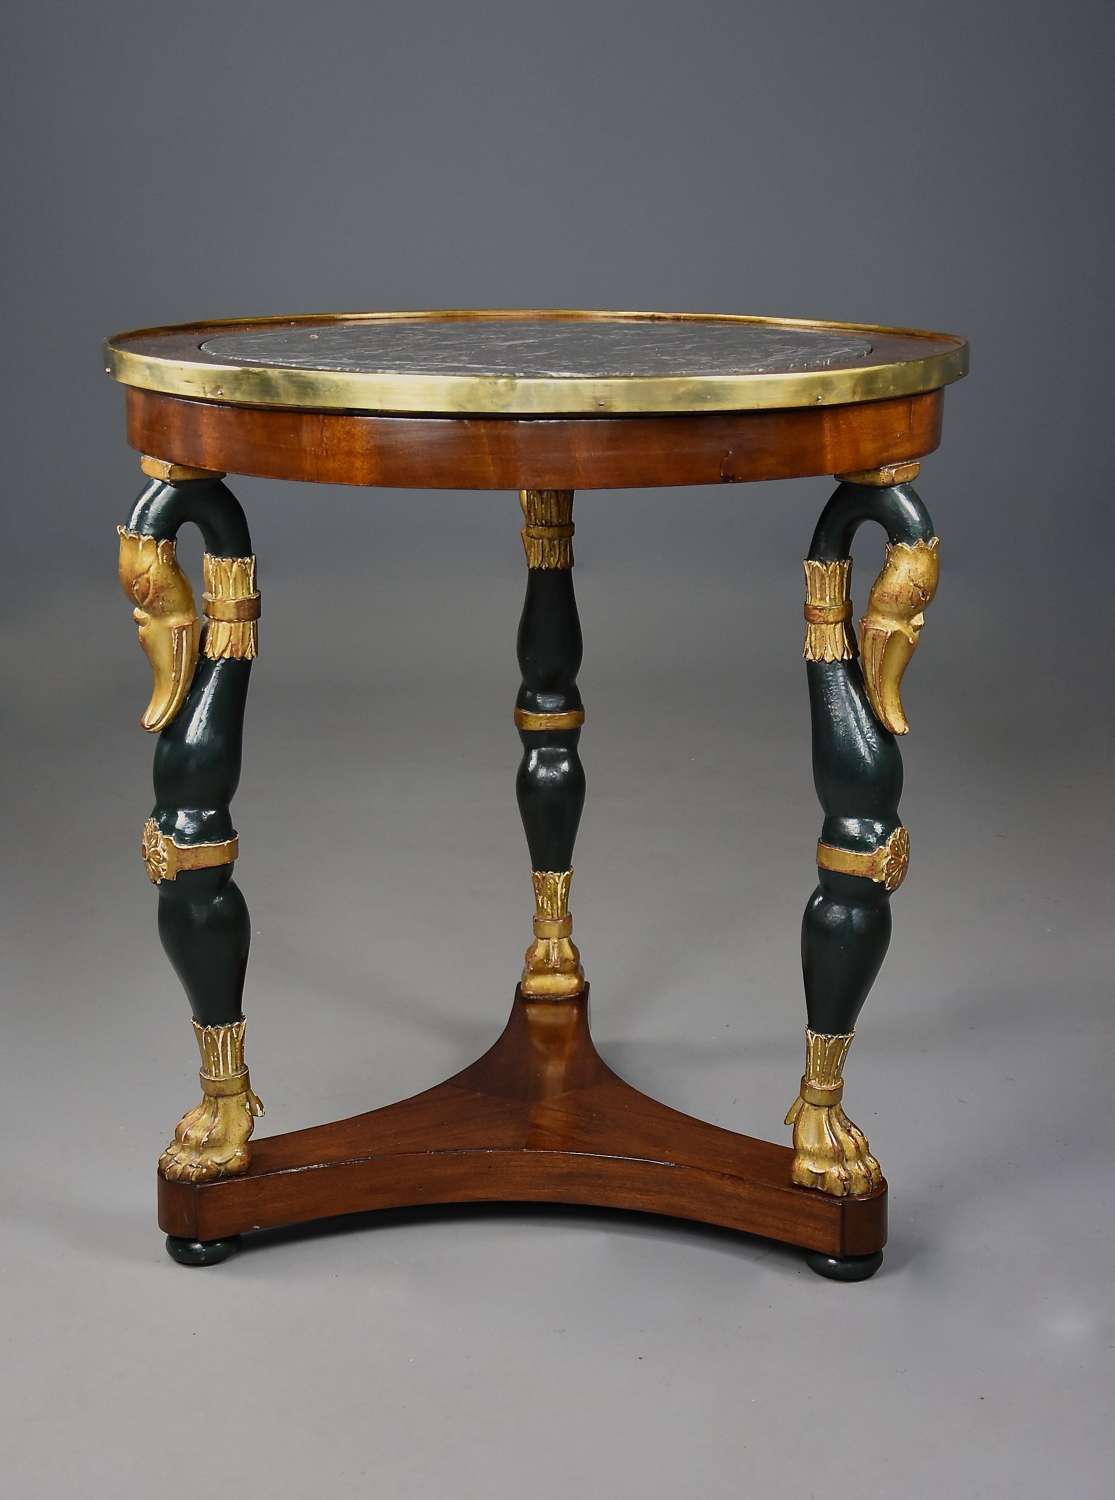 Early 19thc French Empire mahogany Gueridon table with marble top